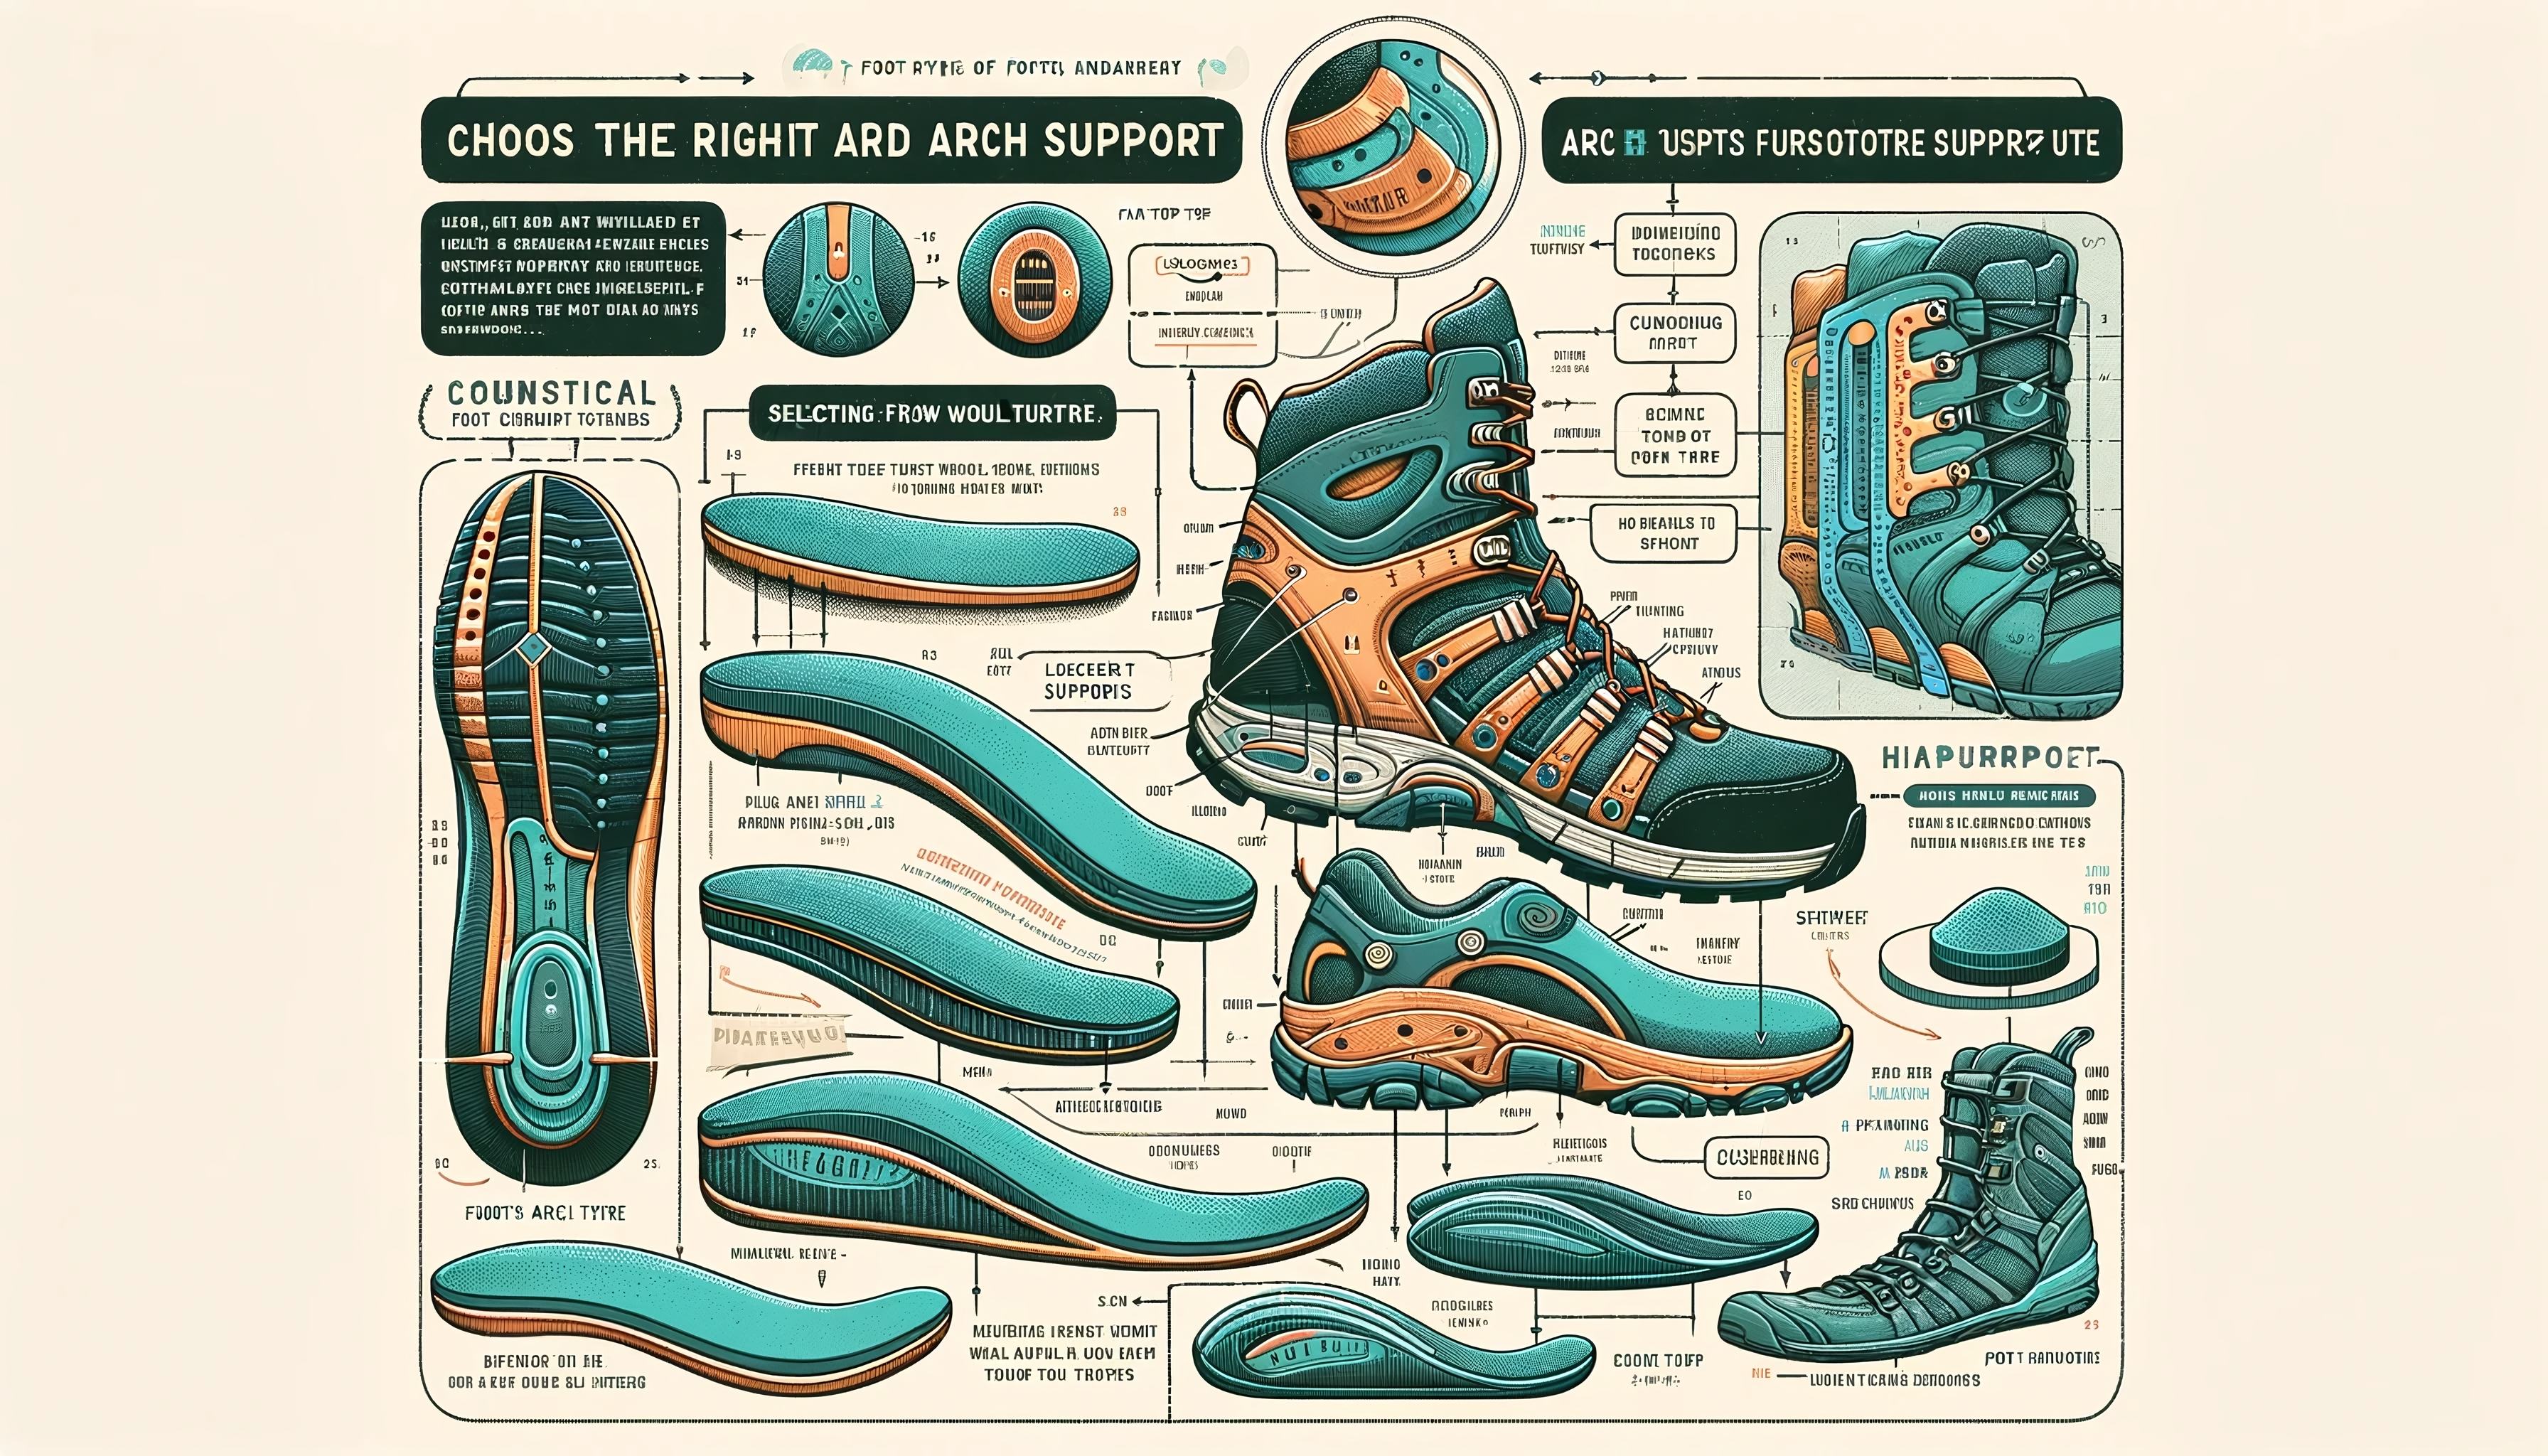 How to Choose the Correct Arch Supports for Hiking Boots